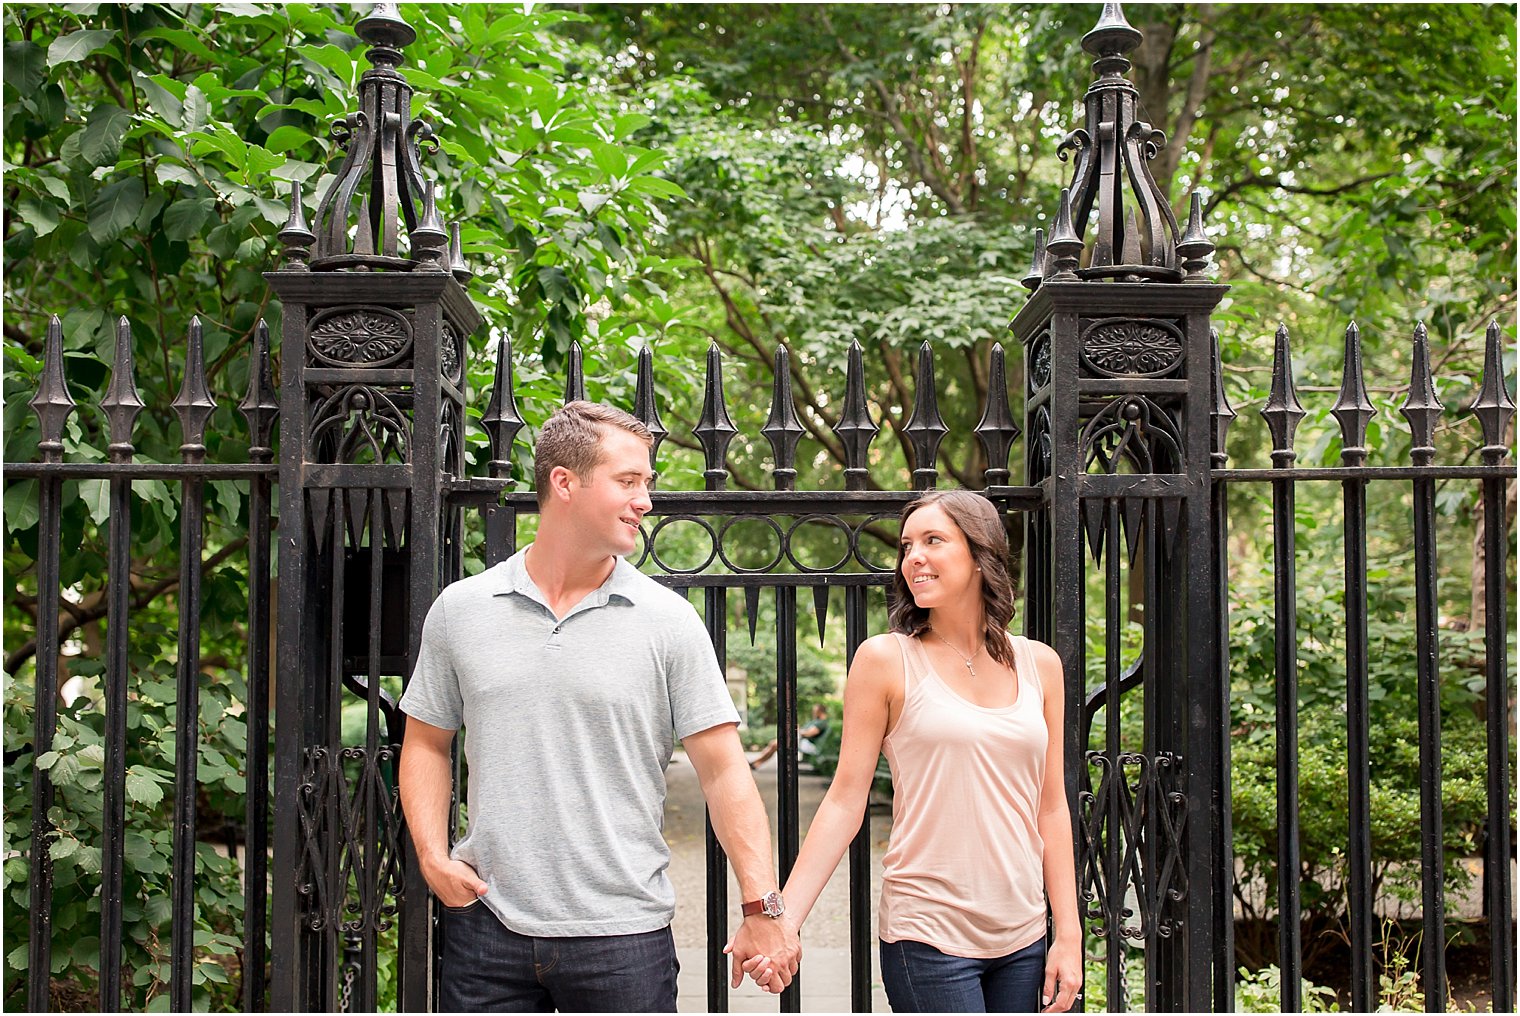 Summer engagement photos in NYC